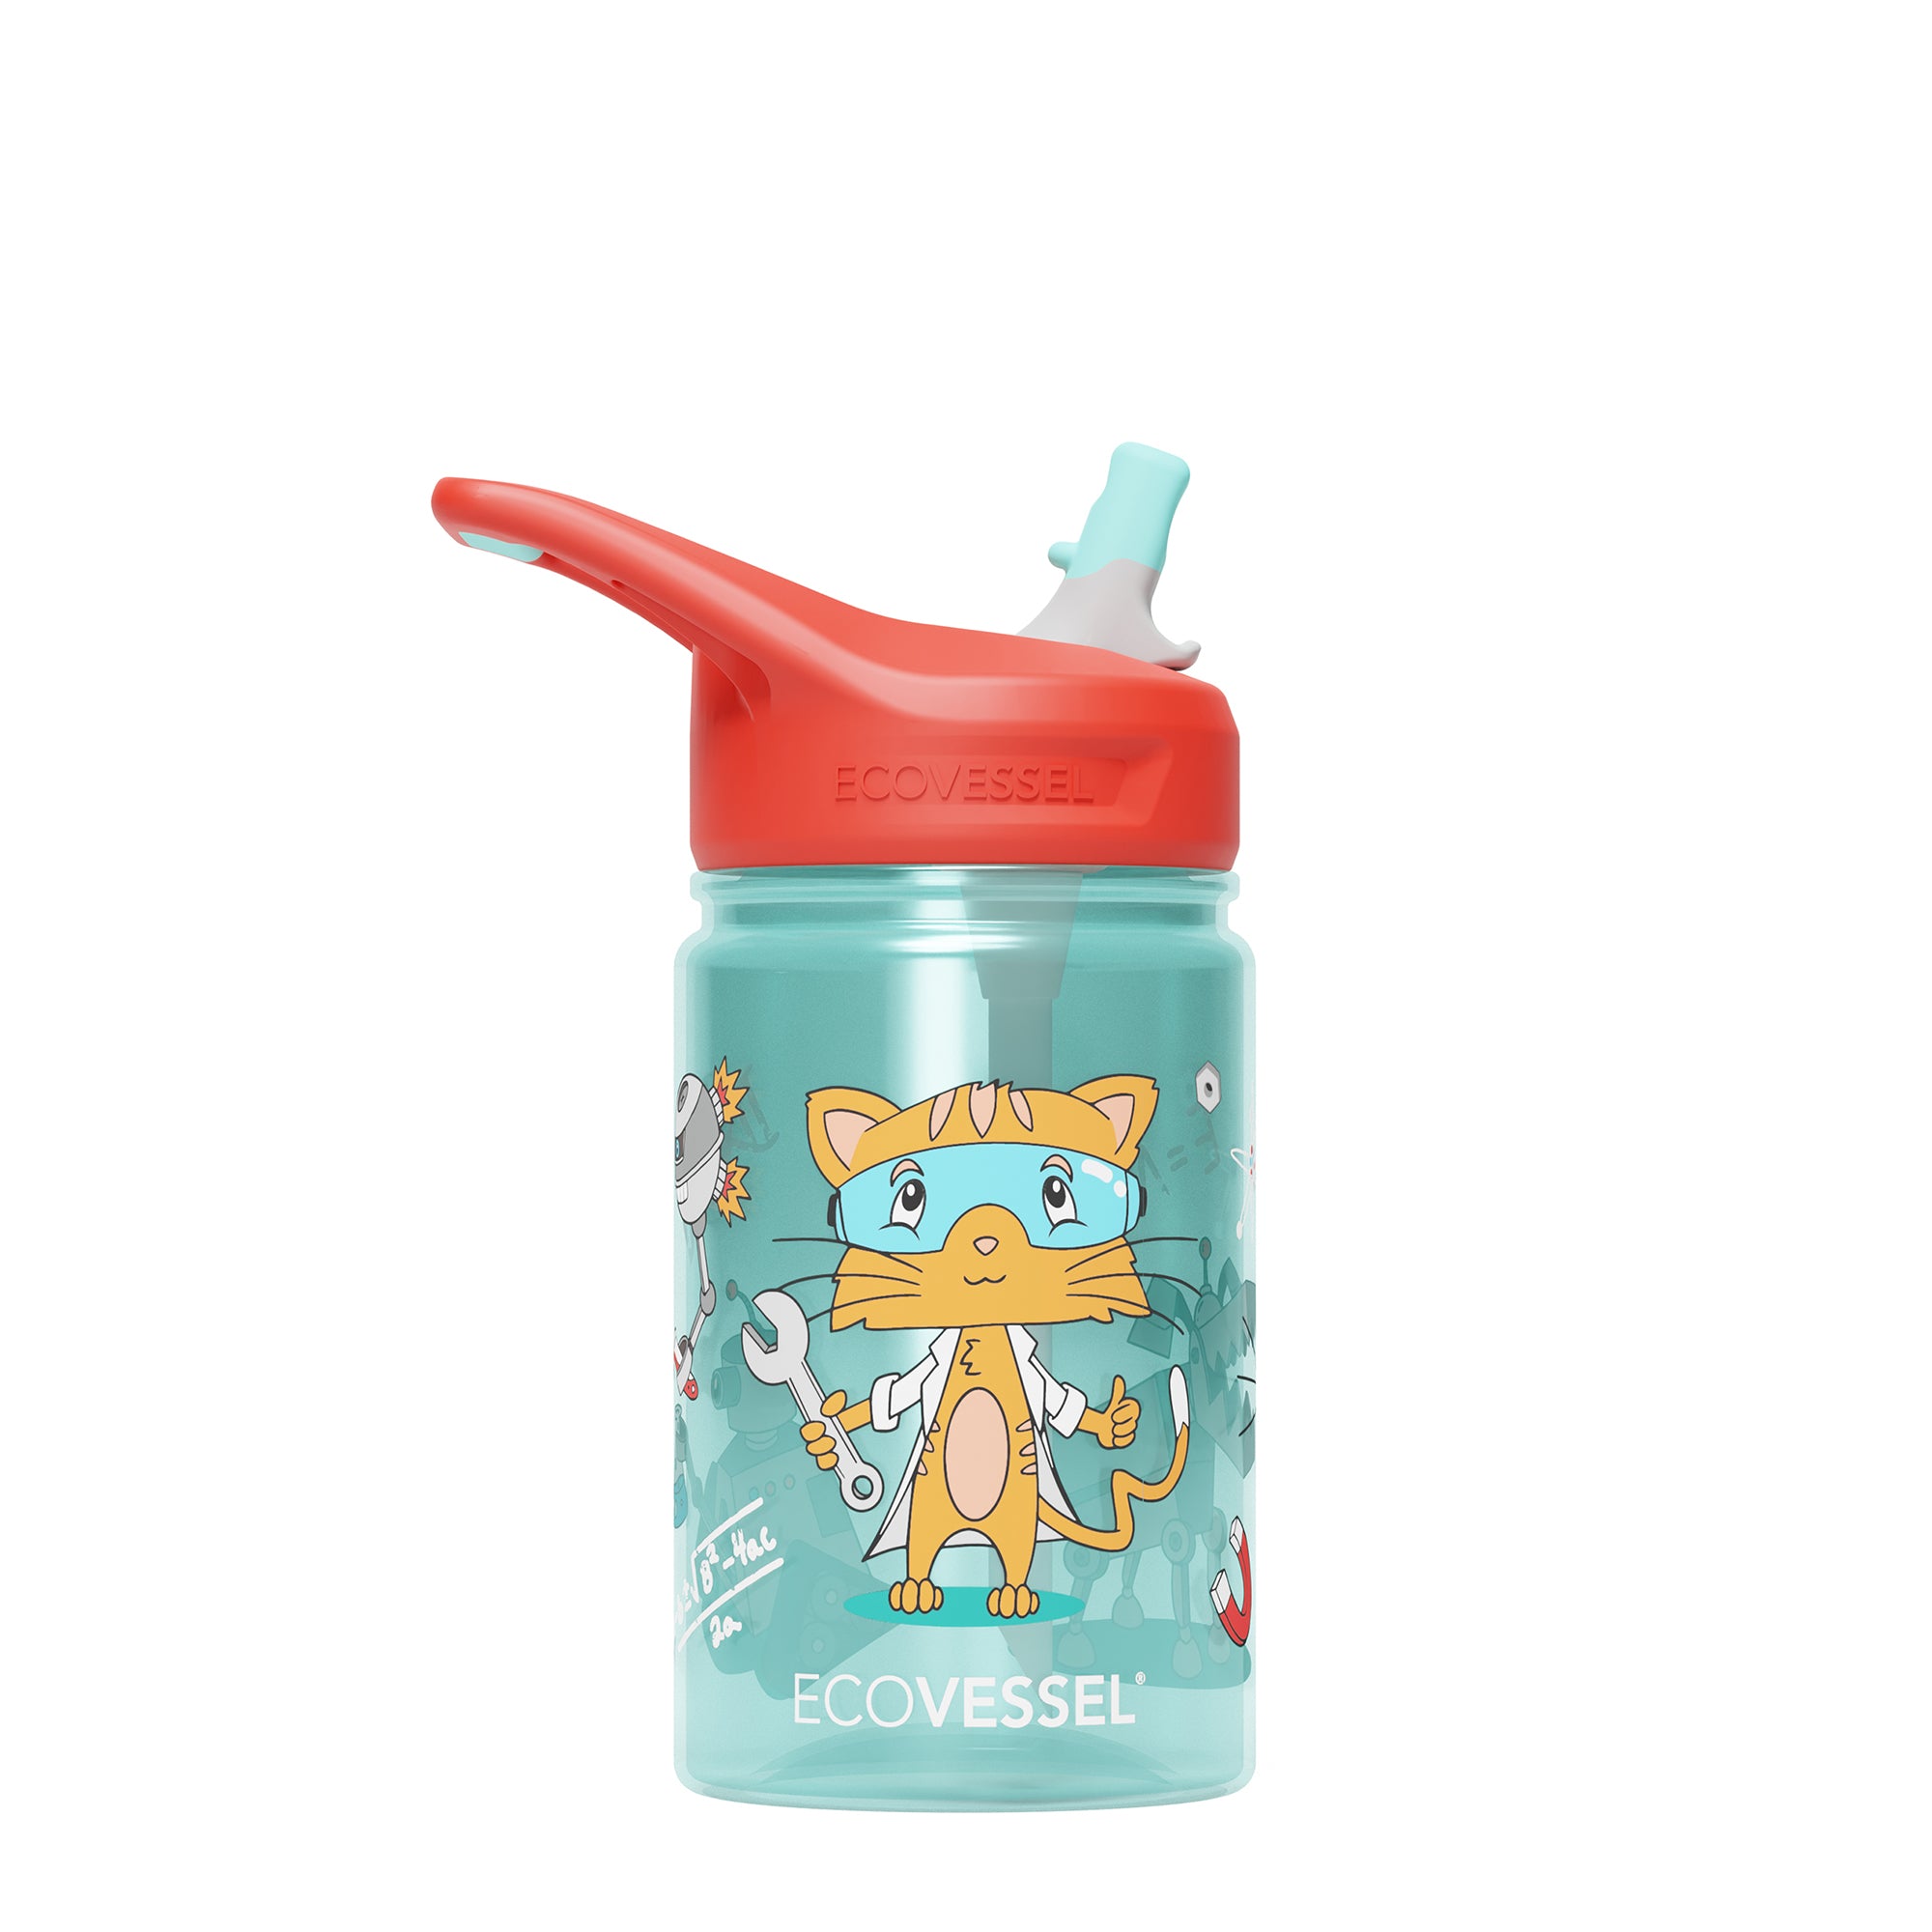 Ecovessel 12oz Reusable Plastic Kids' Water Bottle With Straw